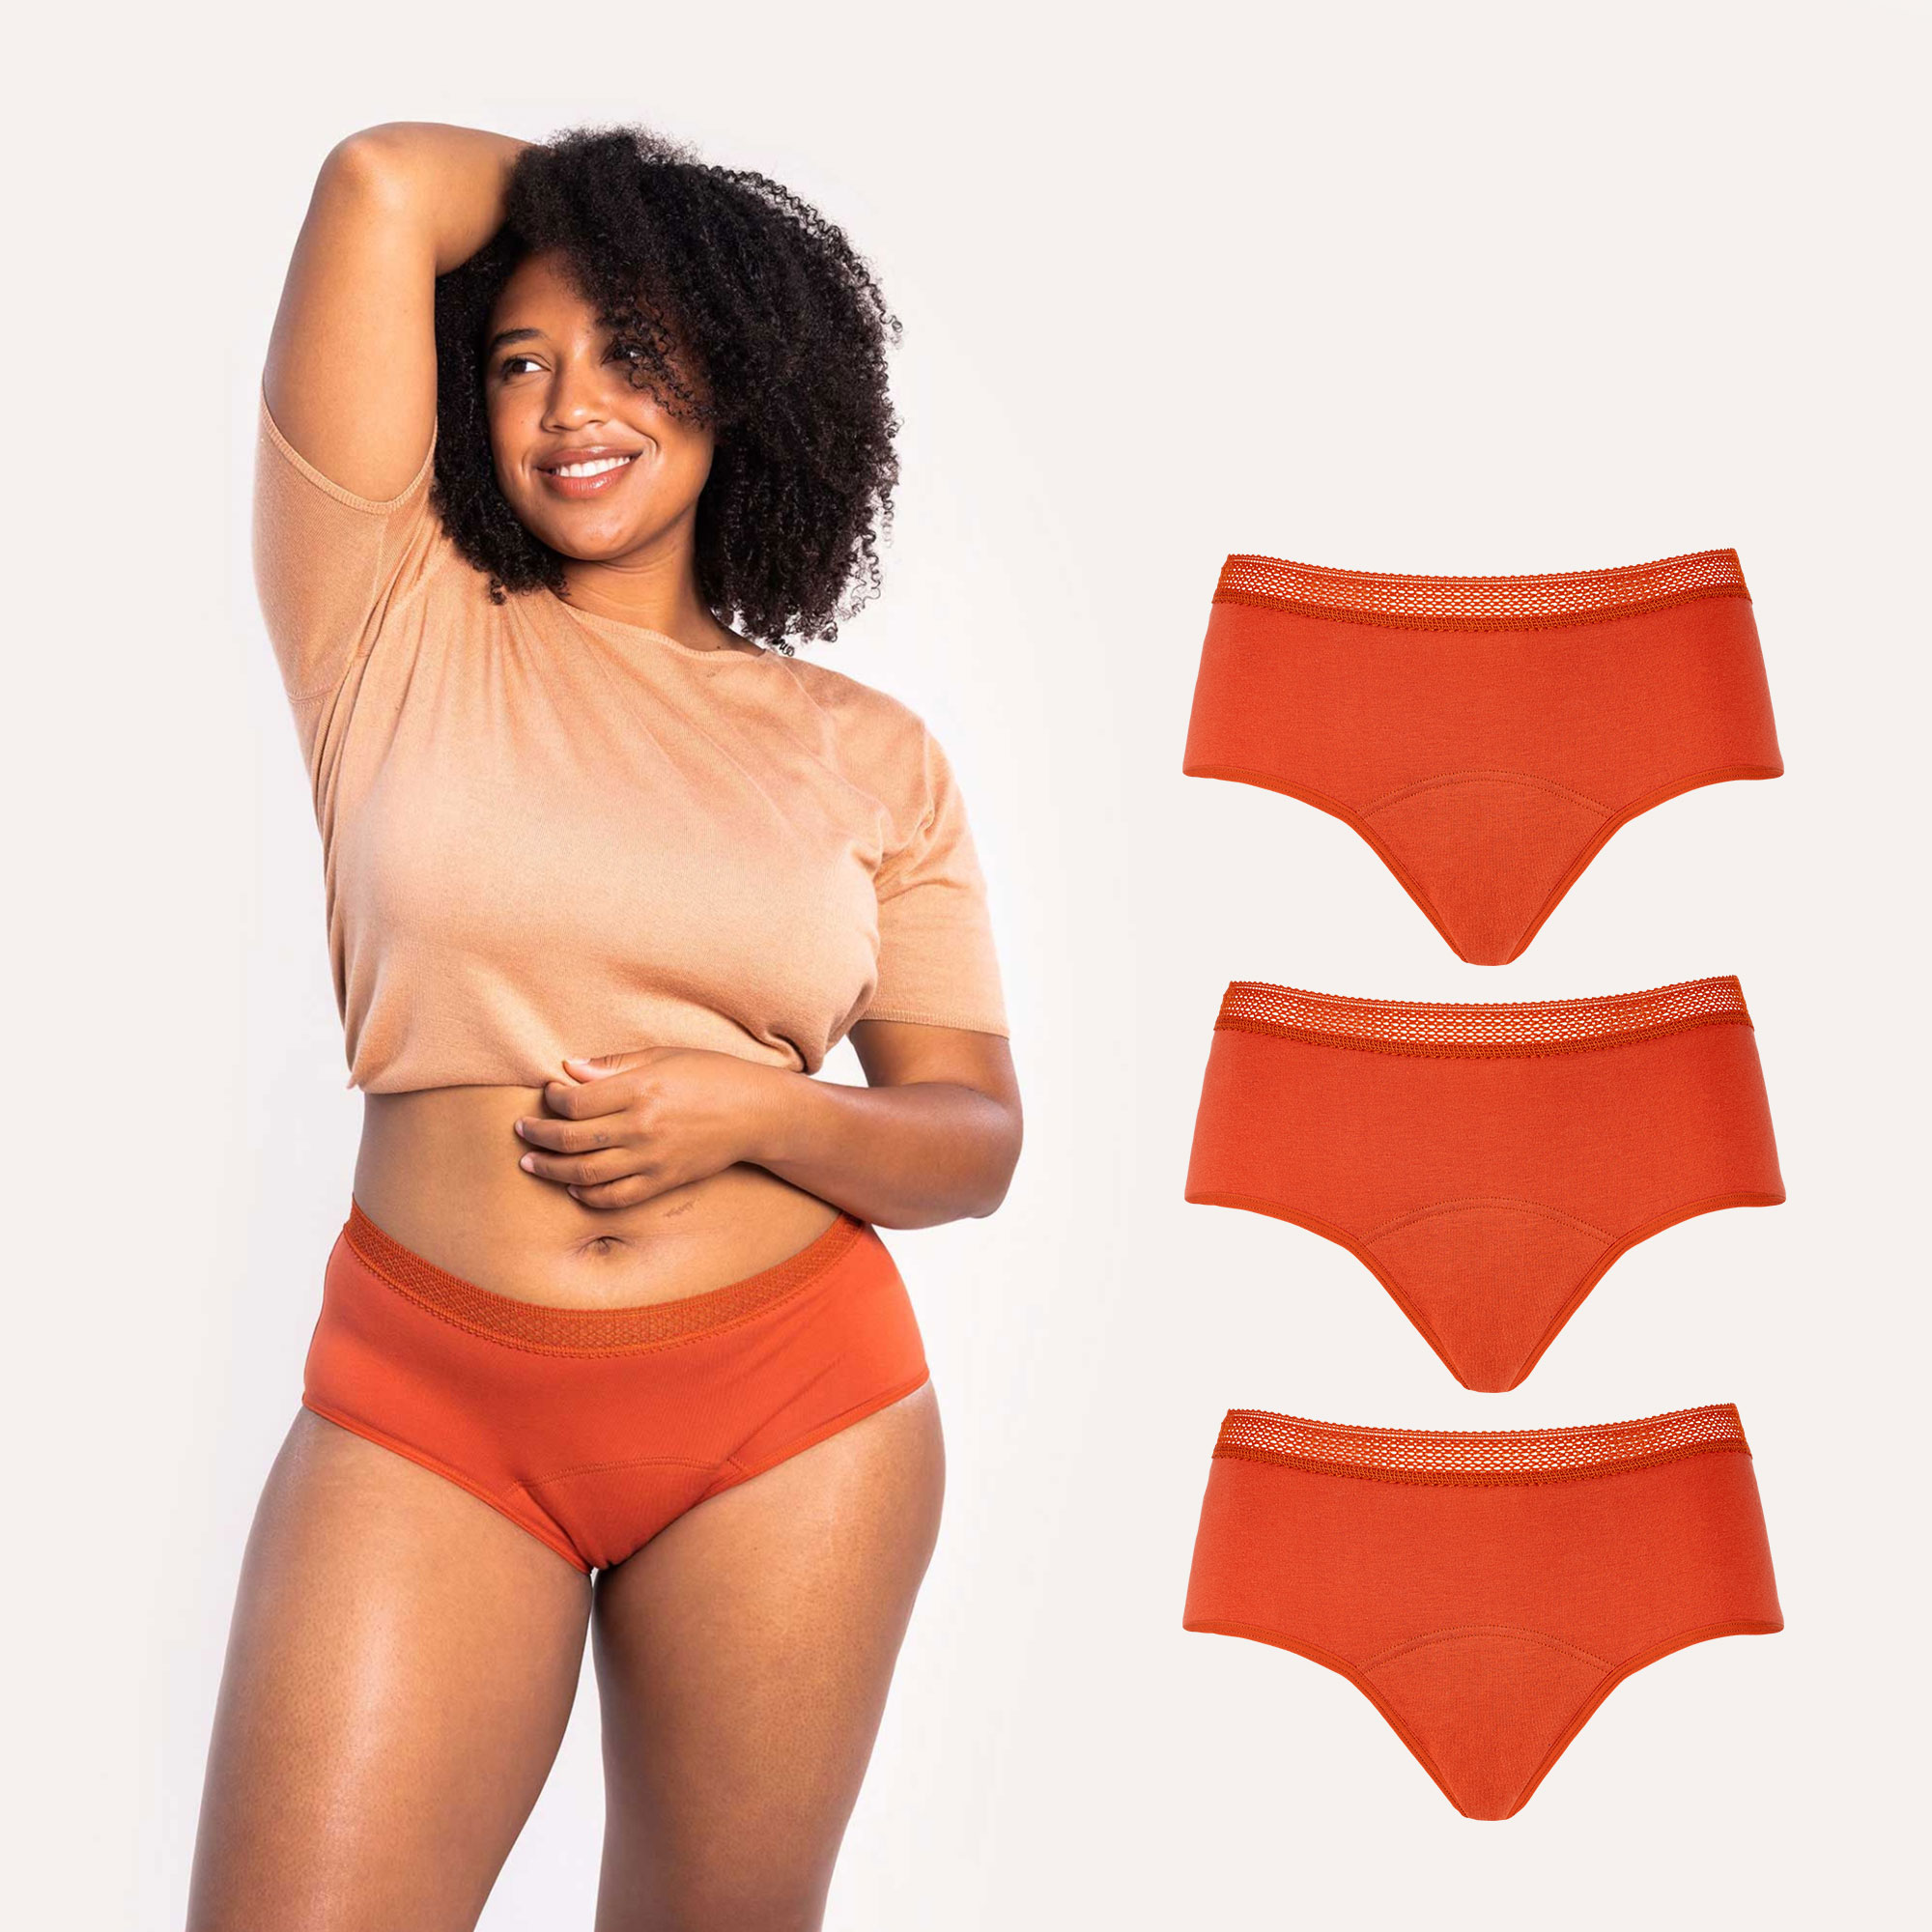 SelenaCare is featured as one of the best period underwear brand